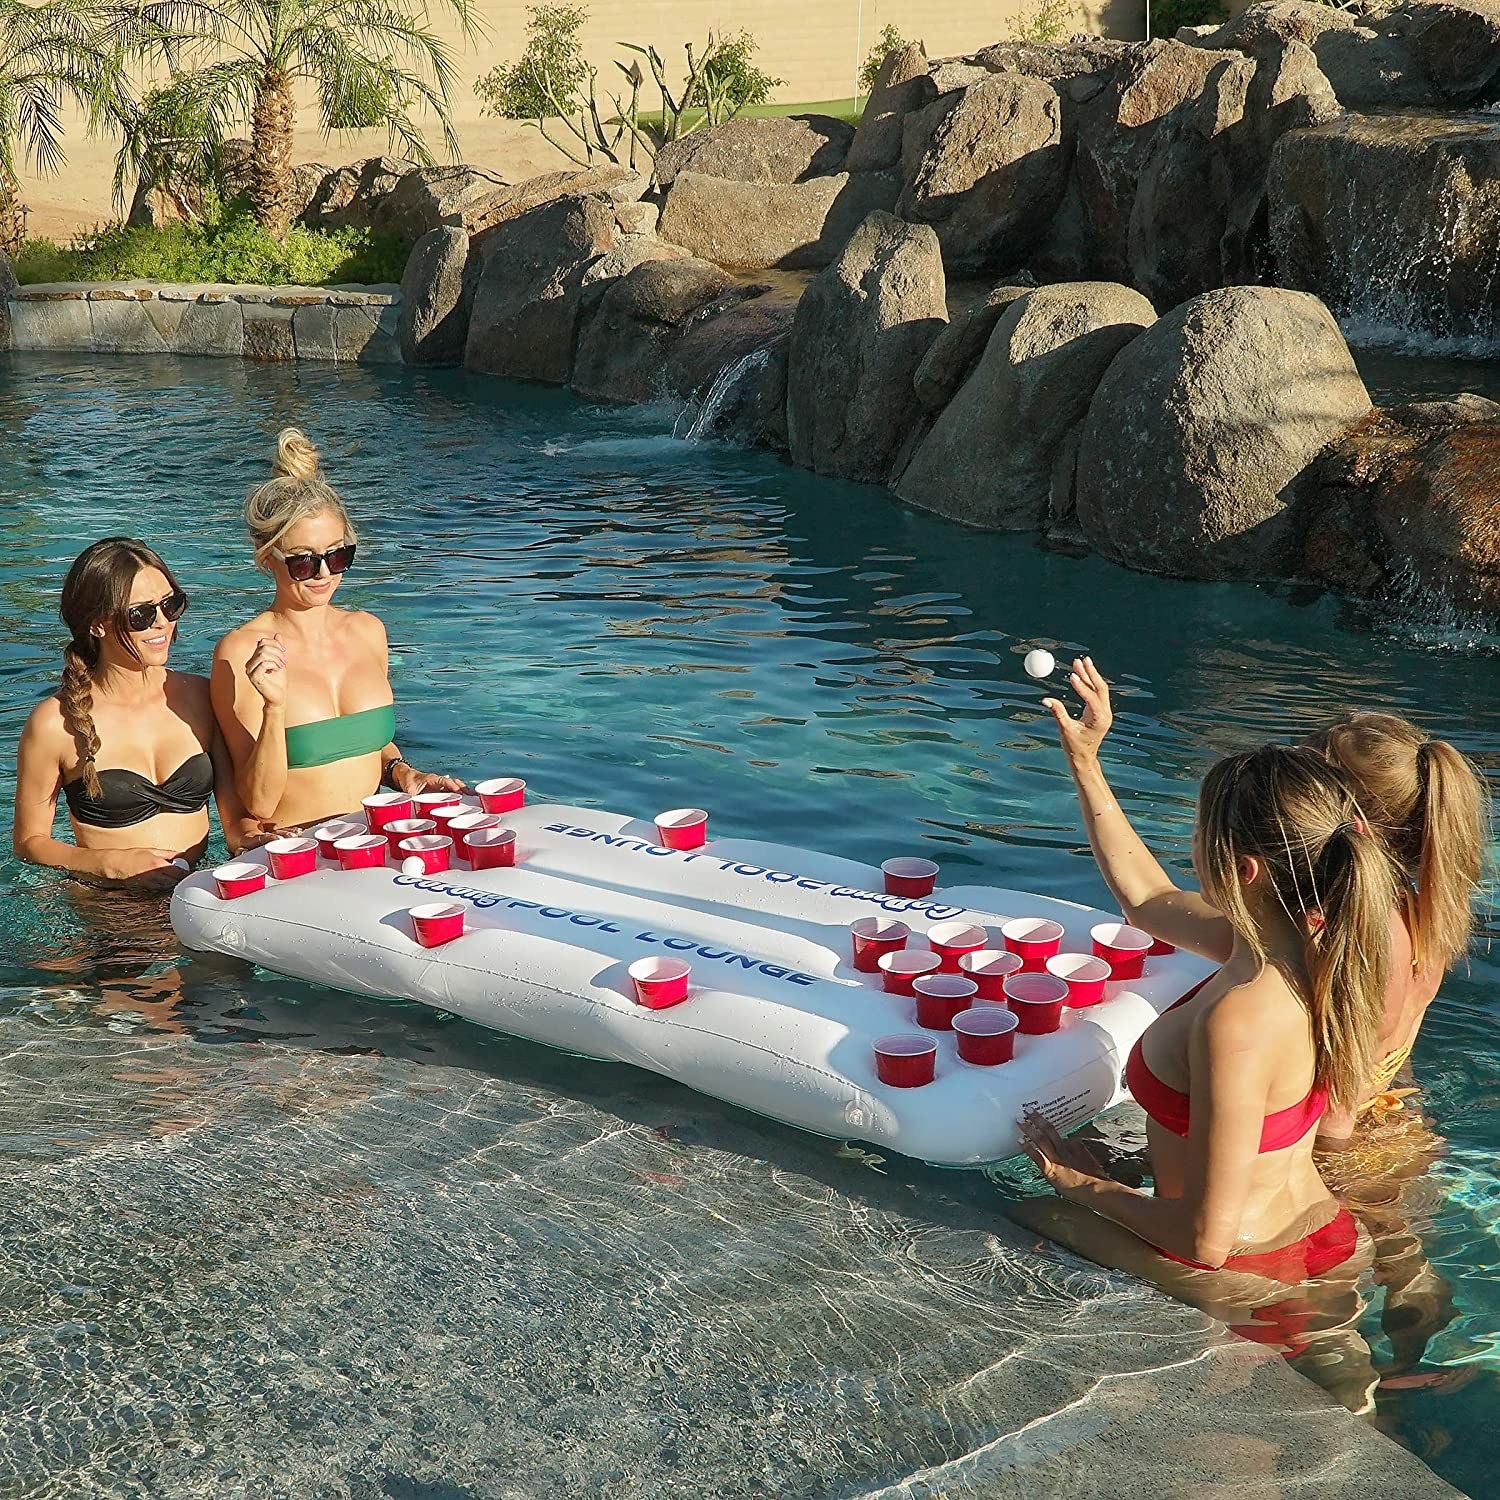 A group of people playing with the table in the pool